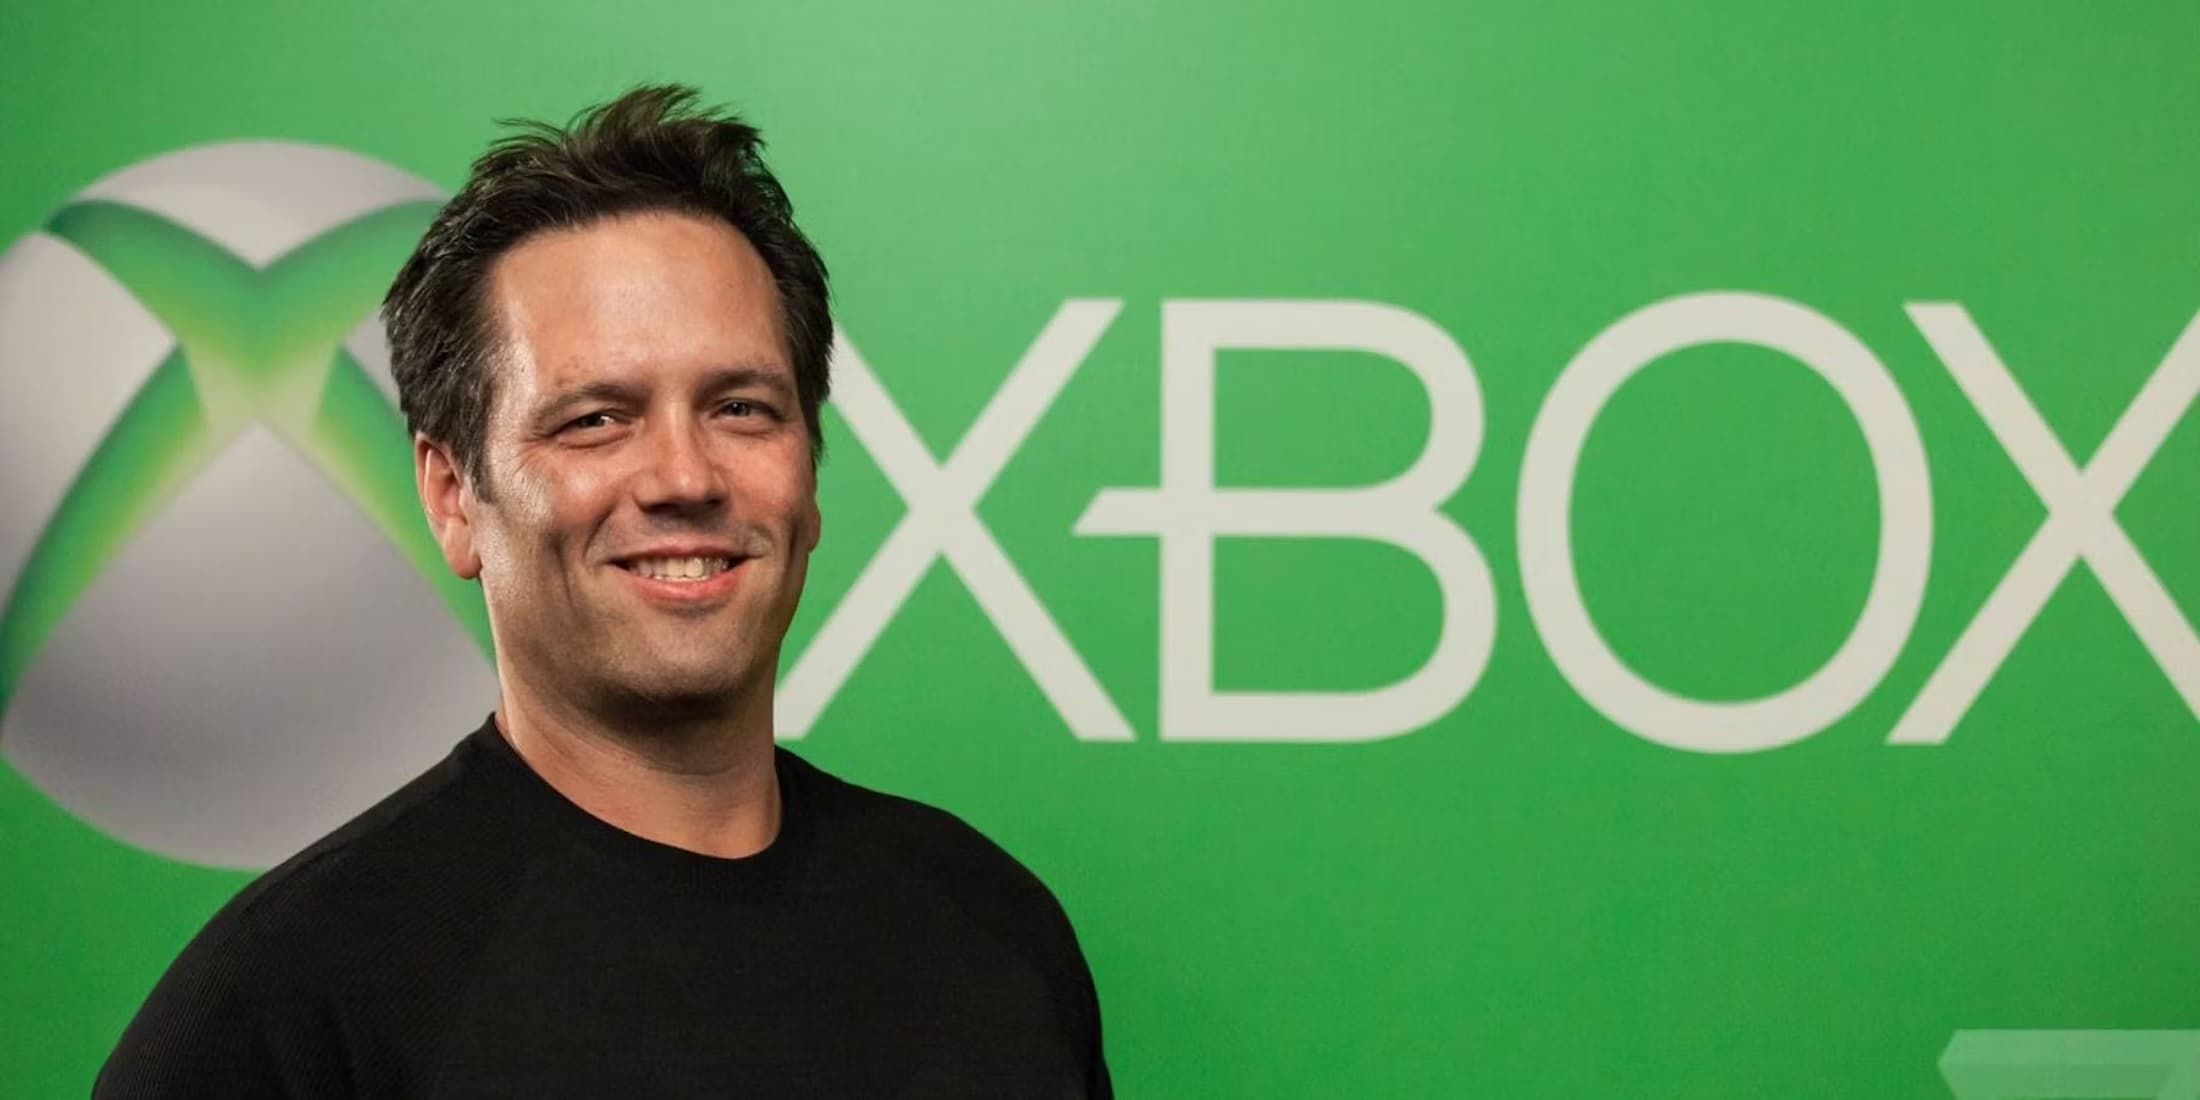 Phil Spencer with the Xbox logo in the background